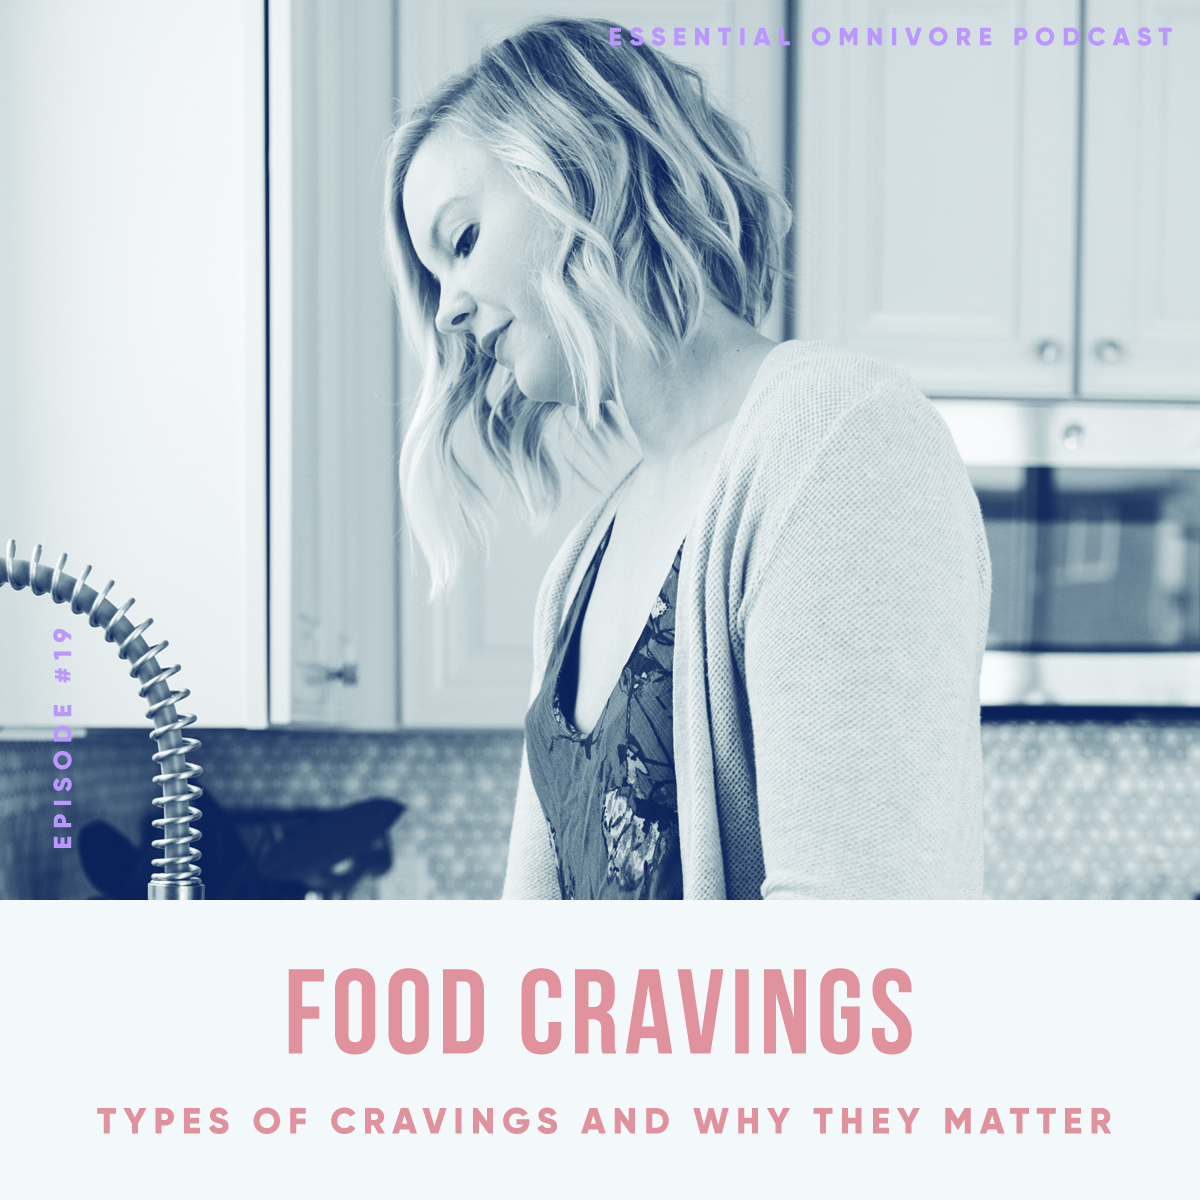 What are food cravings